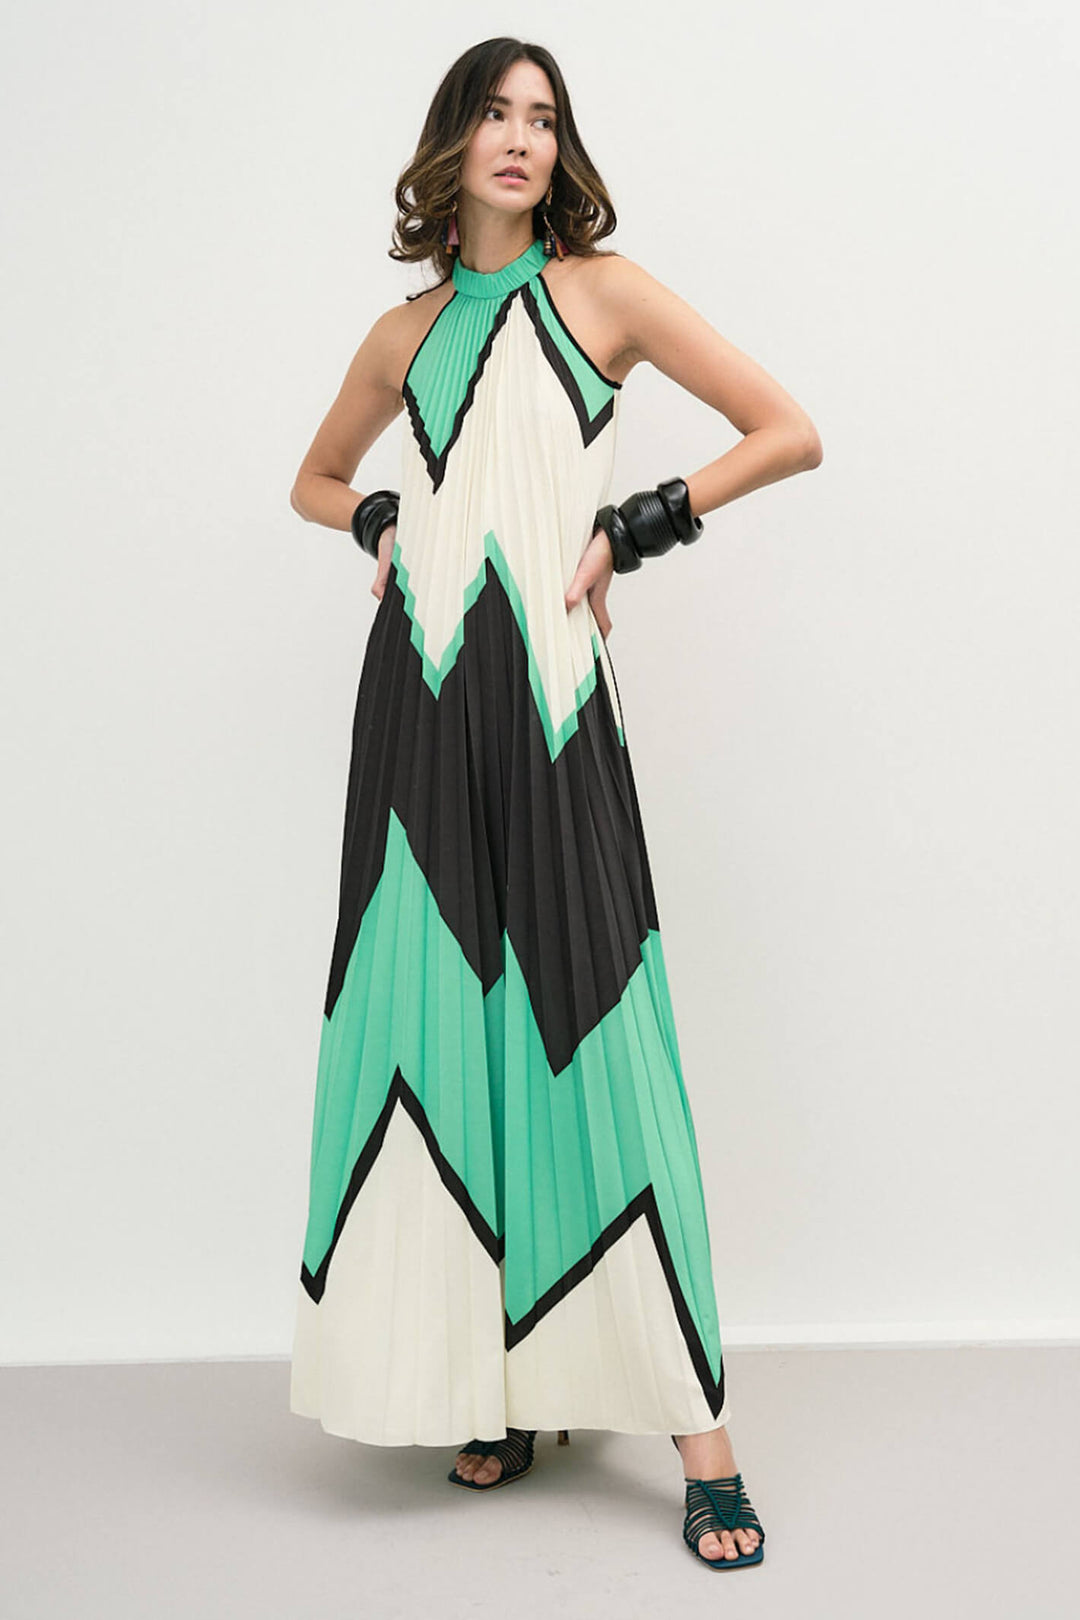 Access Fashion 3323 Green Zigzag Sleeveless Pleated Maxi Dress - Experience Boutique